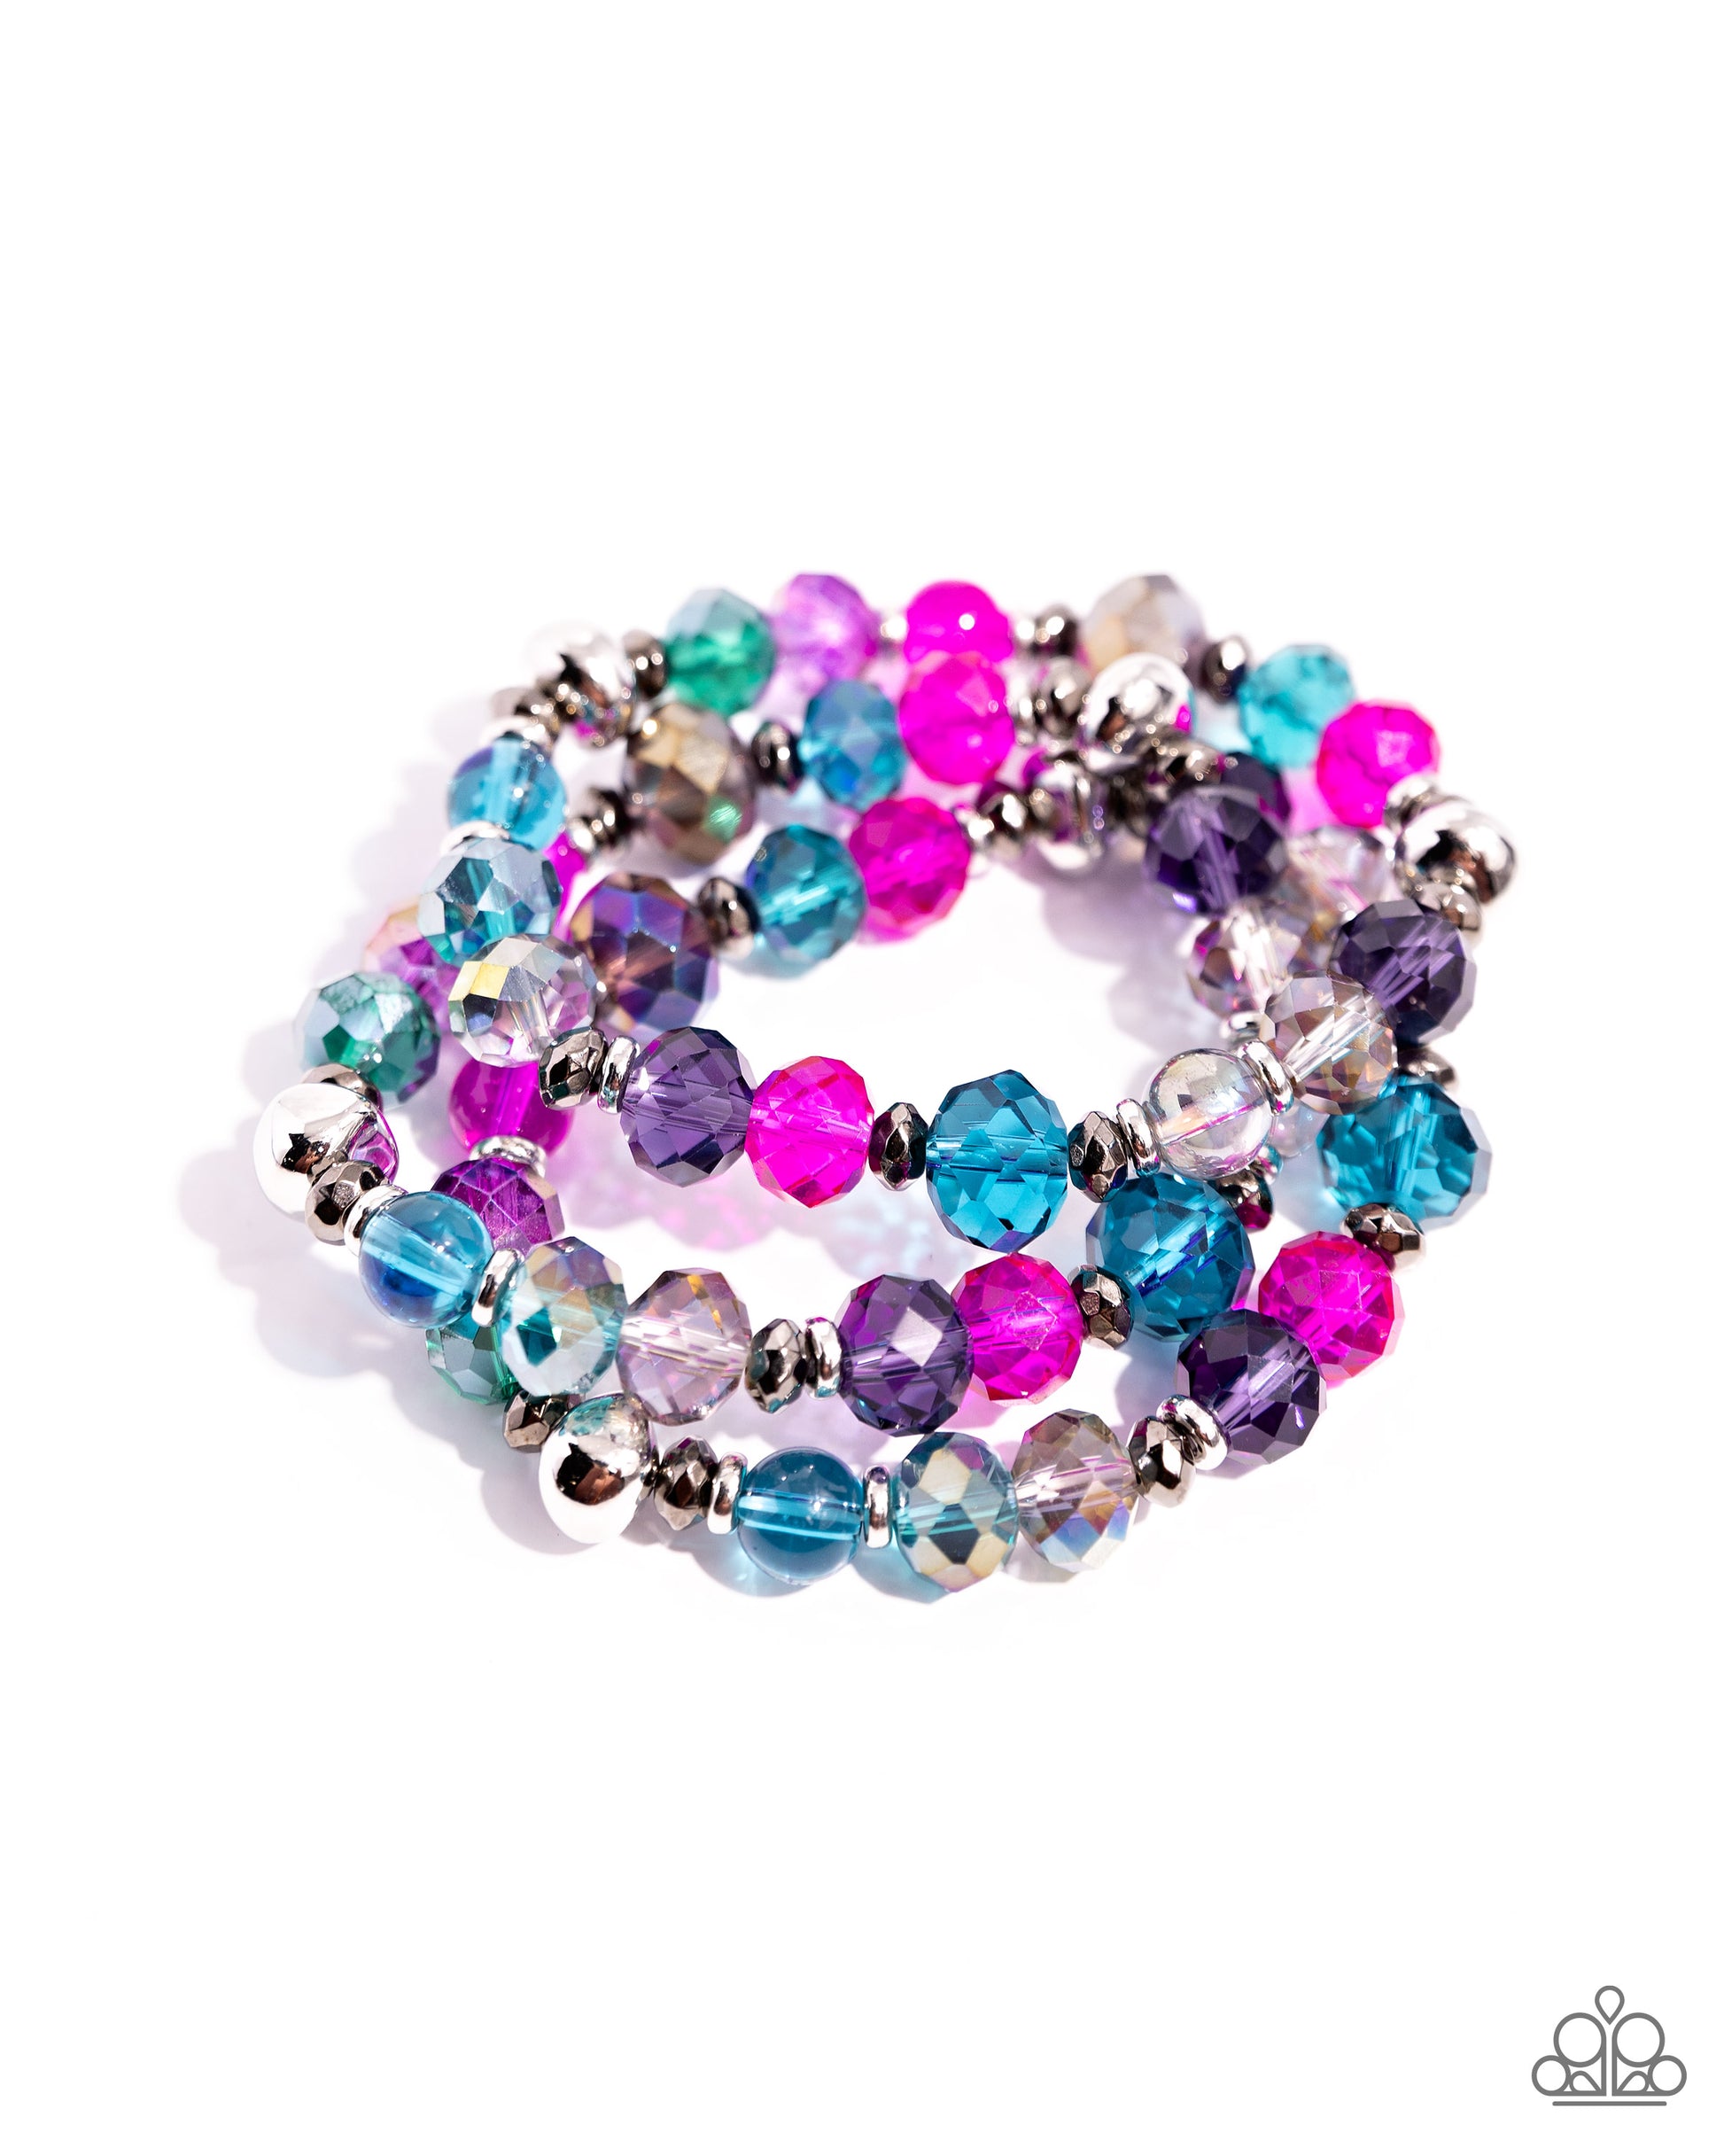 <p>Infused along elastic stretchy bands, a collection of highly-faceted multicolored beads in various shades and silver and gunmetal beads stack along the wrist for a pop of color.</p> <p><i> Sold as one set of three bracelets.</i></p>